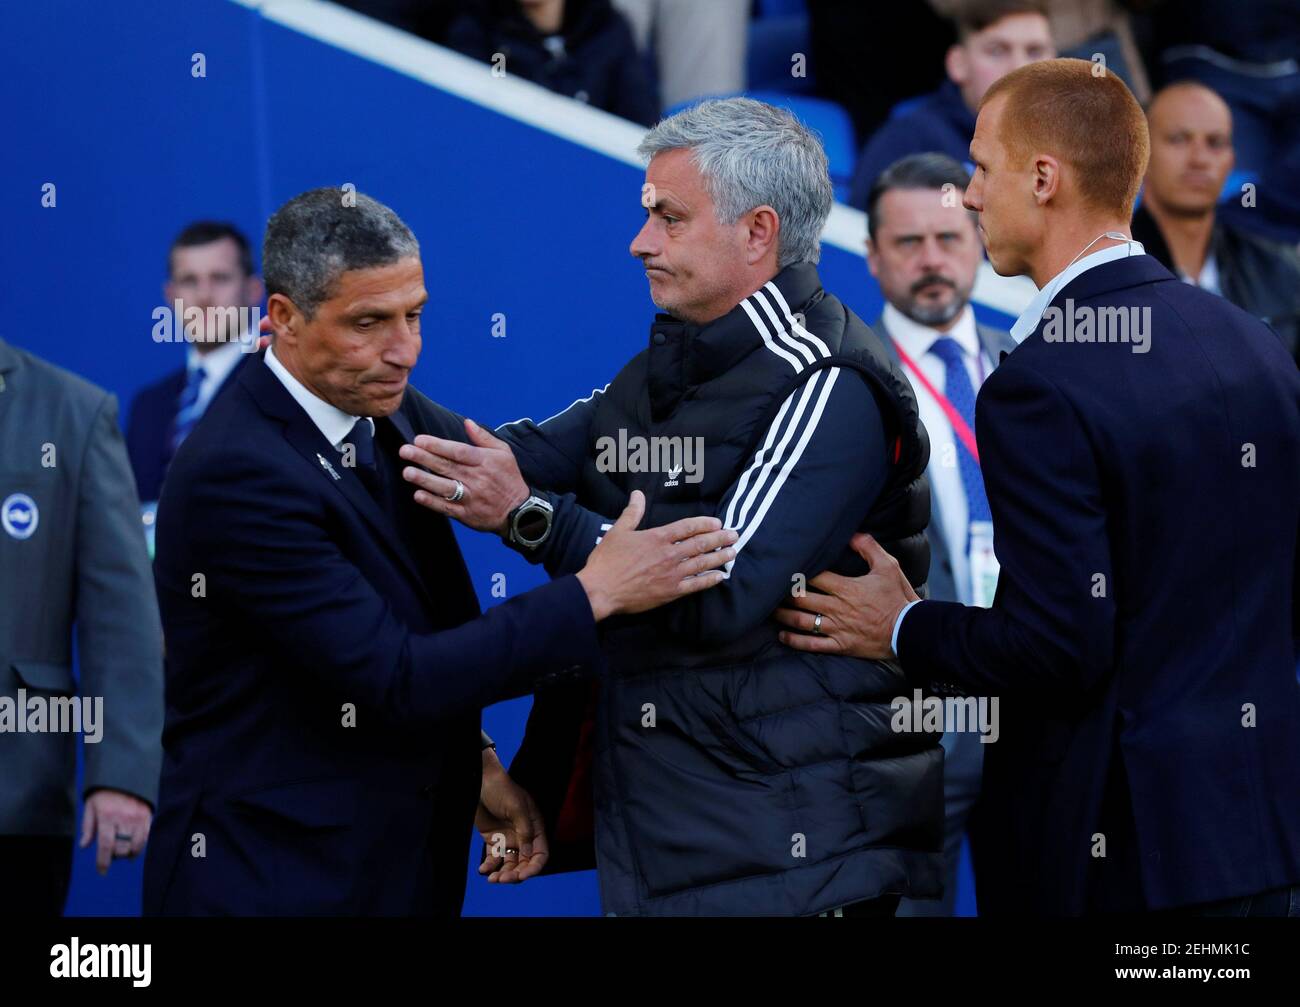 Soccer Football - Premier League - Brighton & Hove Albion v Manchester United - The American Express Community Stadium, Brighton, Britain - May 4, 2018   Manchester United manager Jose Mourinho and Brighton manager Chris Hughton before the match as Steve Sidwell looks on   REUTERS/Eddie Keogh    EDITORIAL USE ONLY. No use with unauthorized audio, video, data, fixture lists, club/league logos or "live" services. Online in-match use limited to 75 images, no video emulation. No use in betting, games or single club/league/player publications.  Please contact your account representative for further Stock Photo